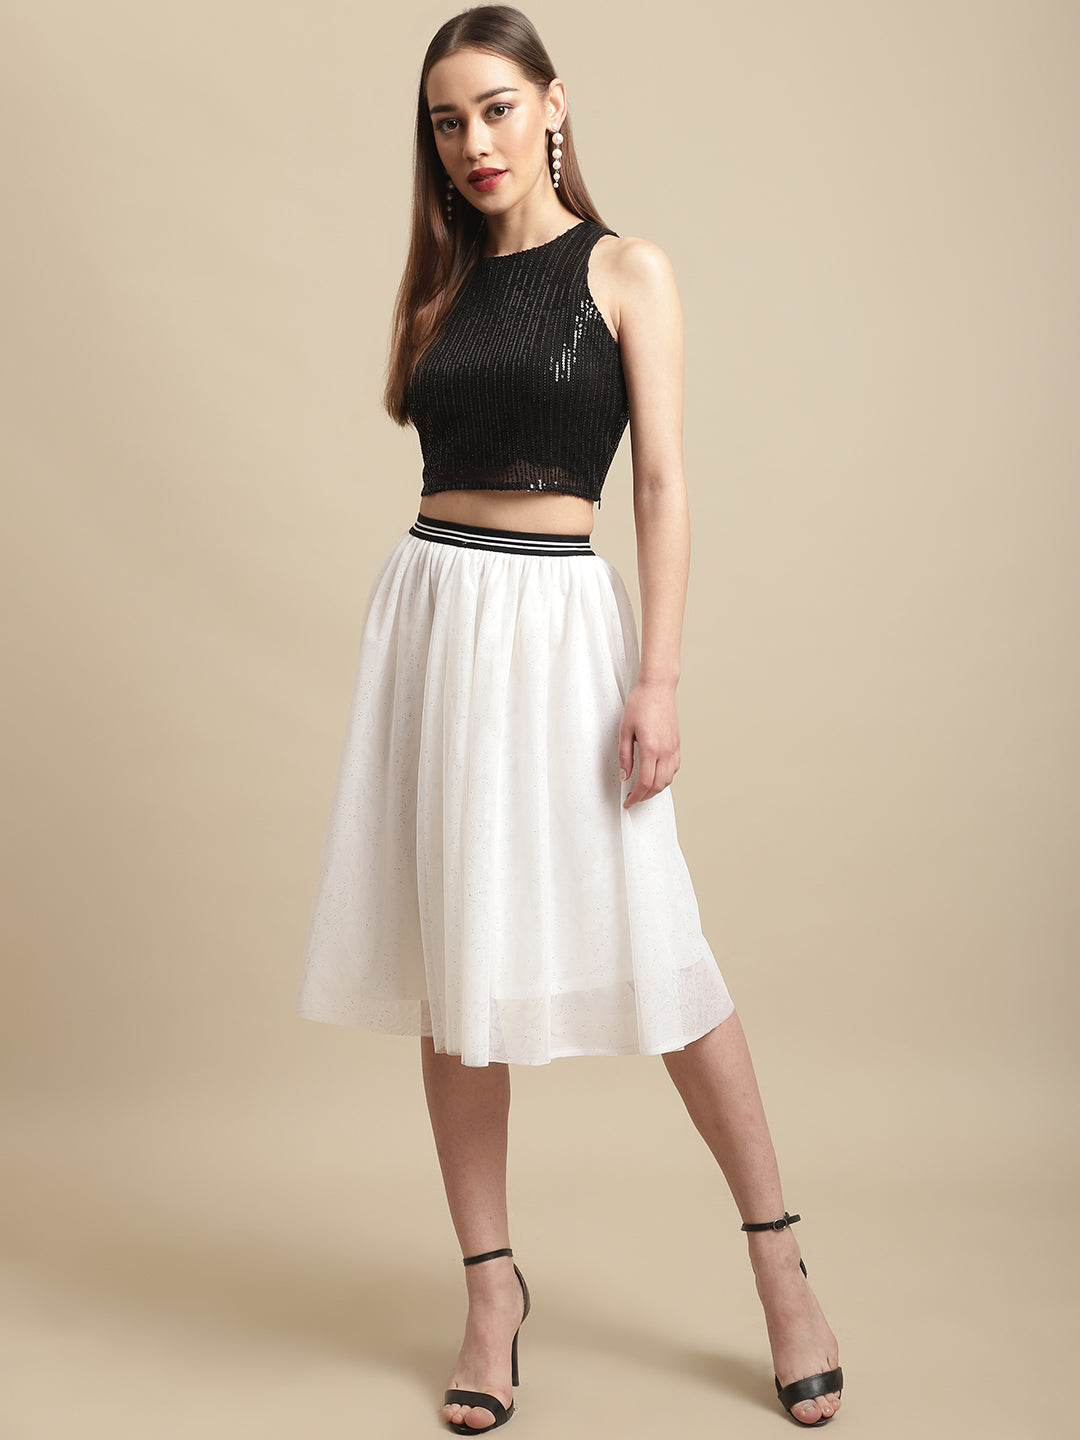 Black Crop Top With Mesh Skirt Co-Ord Set